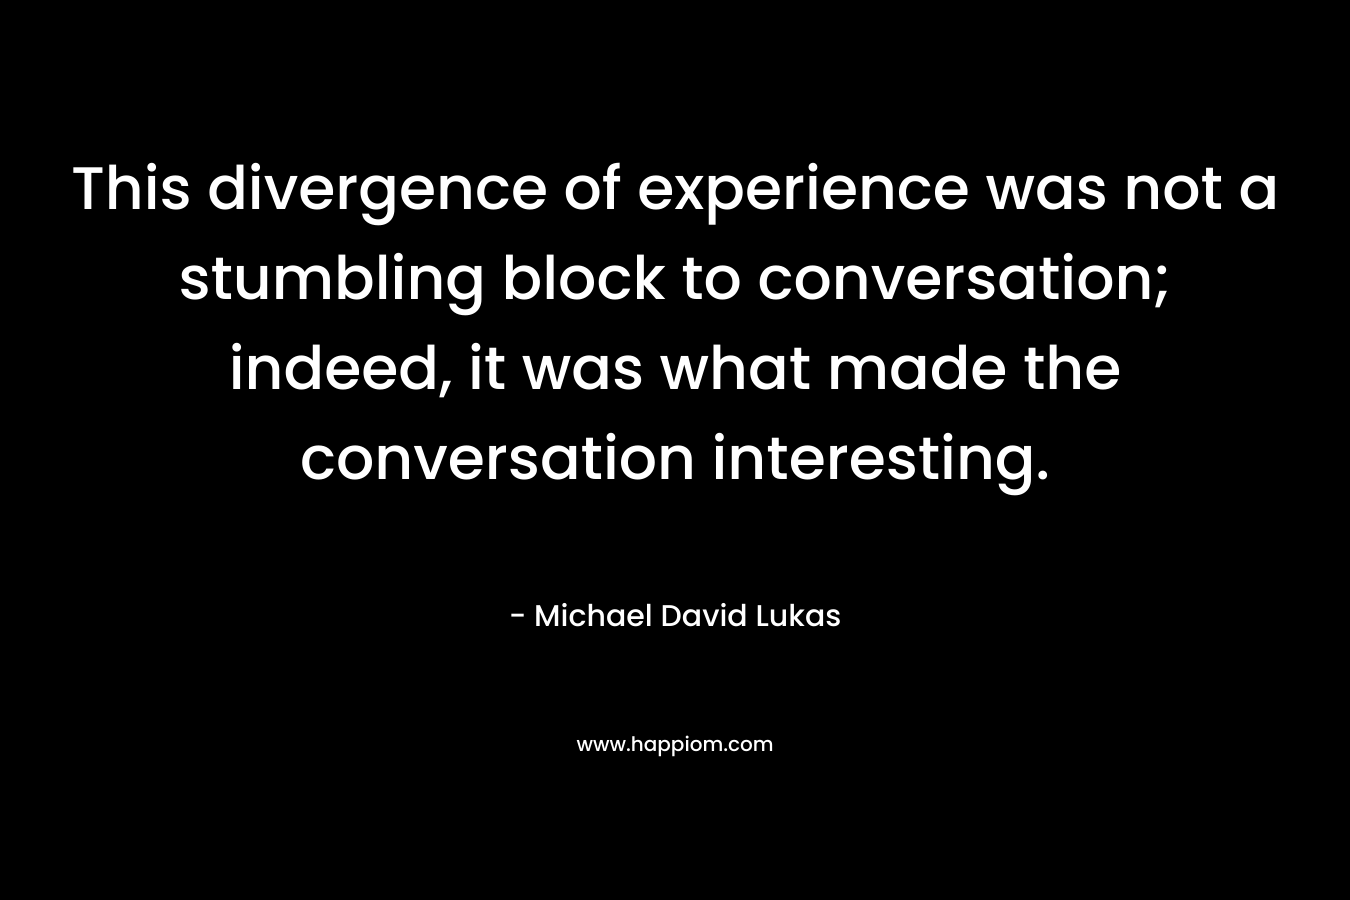 This divergence of experience was not a stumbling block to conversation; indeed, it was what made the conversation interesting.